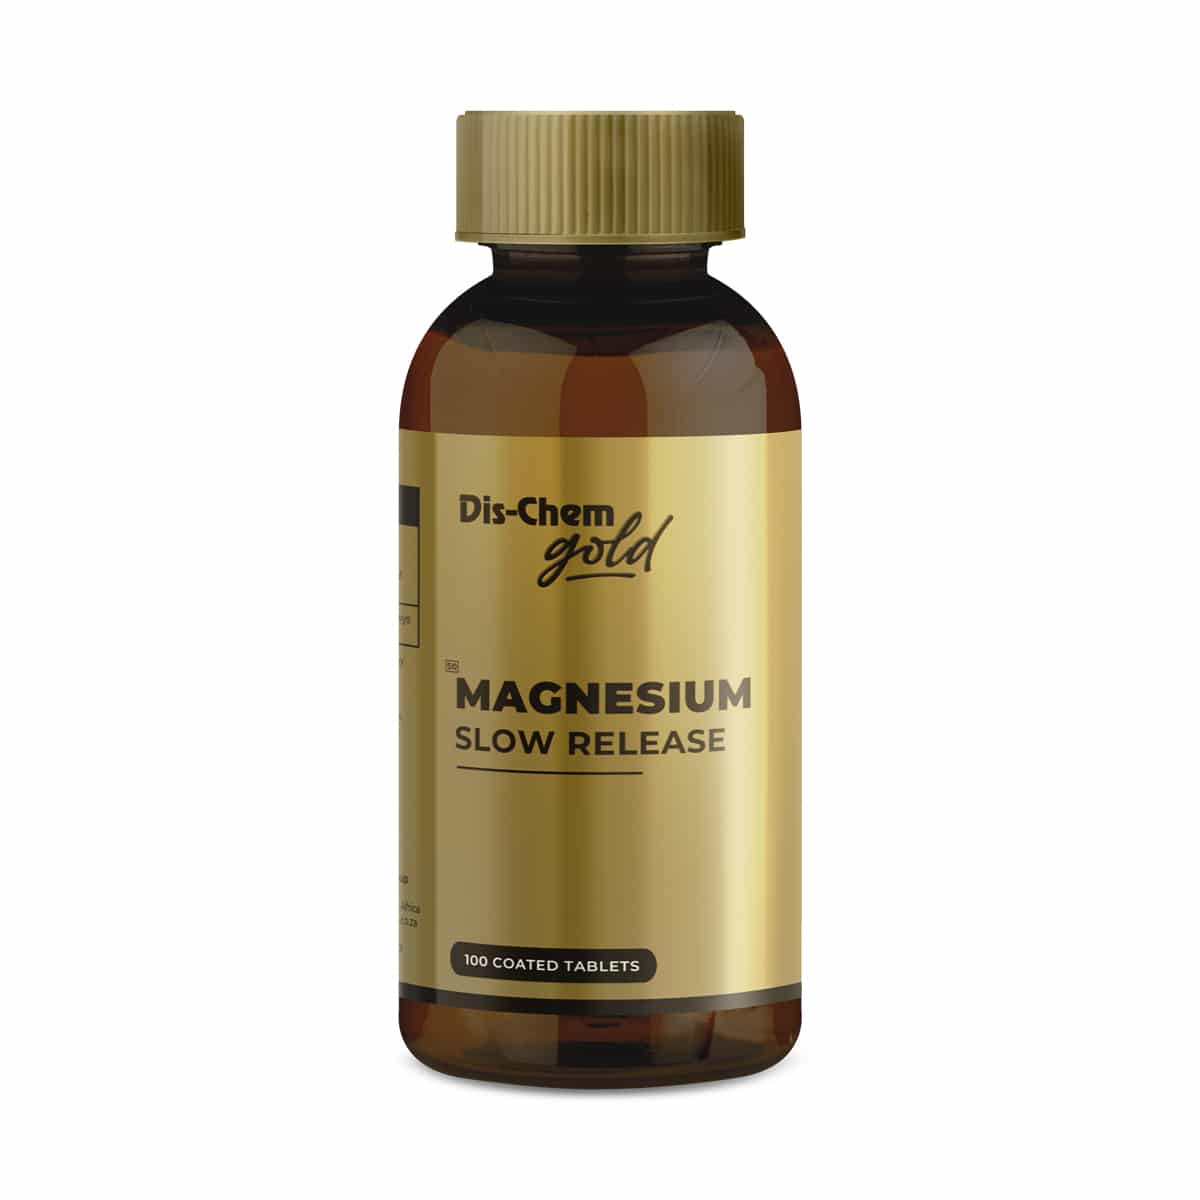 Dis-Chem Gold Magnesium Slow Release - 100 Coated Tabs